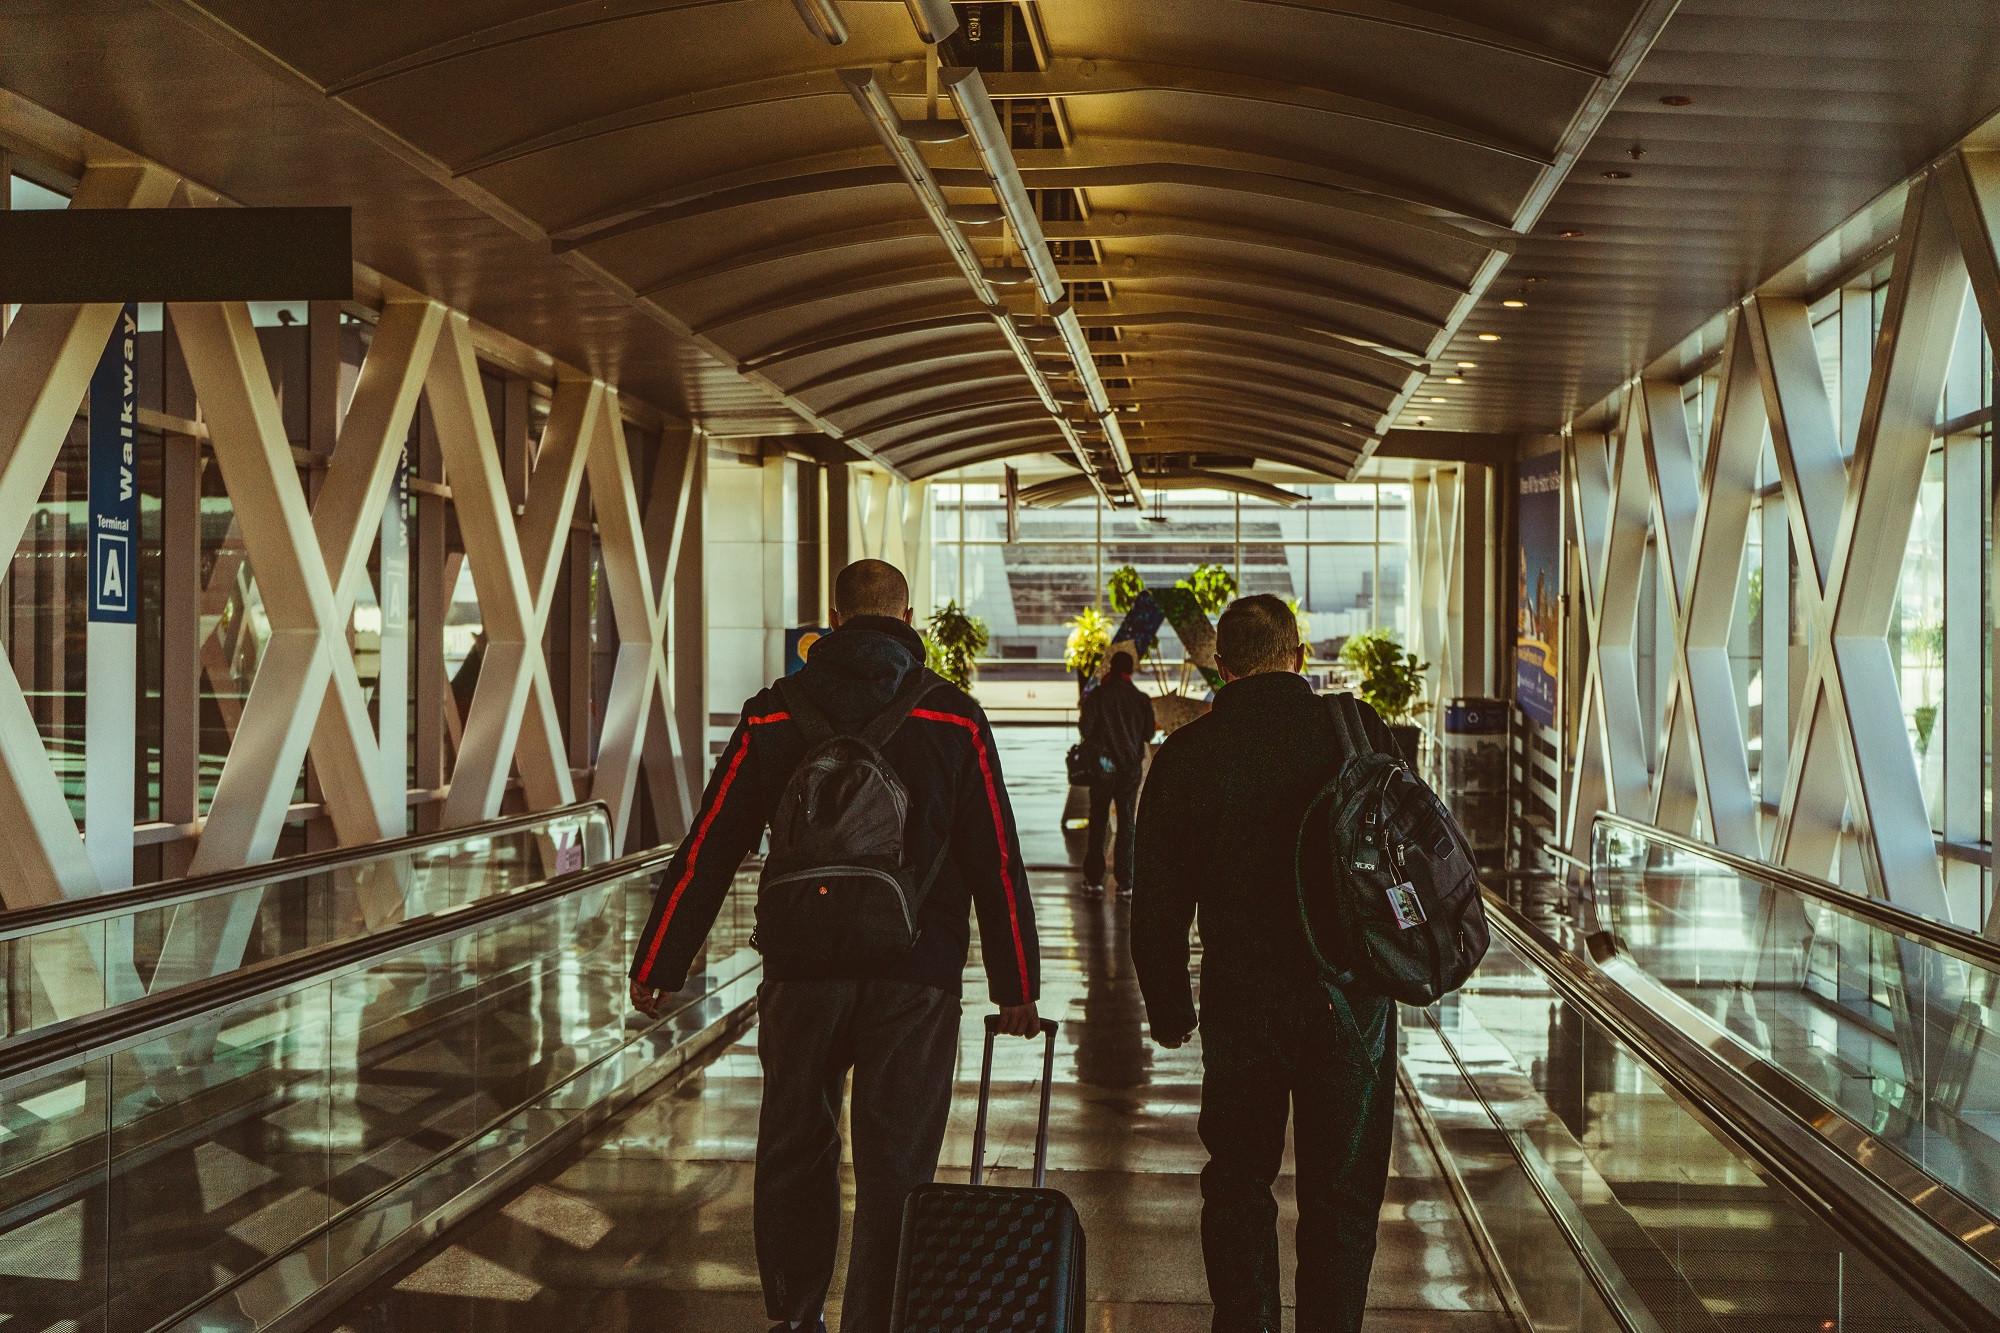 New study commissioned by Advil and conducted by OnePoll found that more than a third of Americans agree that the aches and pains associated with traveling have kept them from traveling longer distances. Undated photograph. (Flor Mora, SWNS/Zenger)